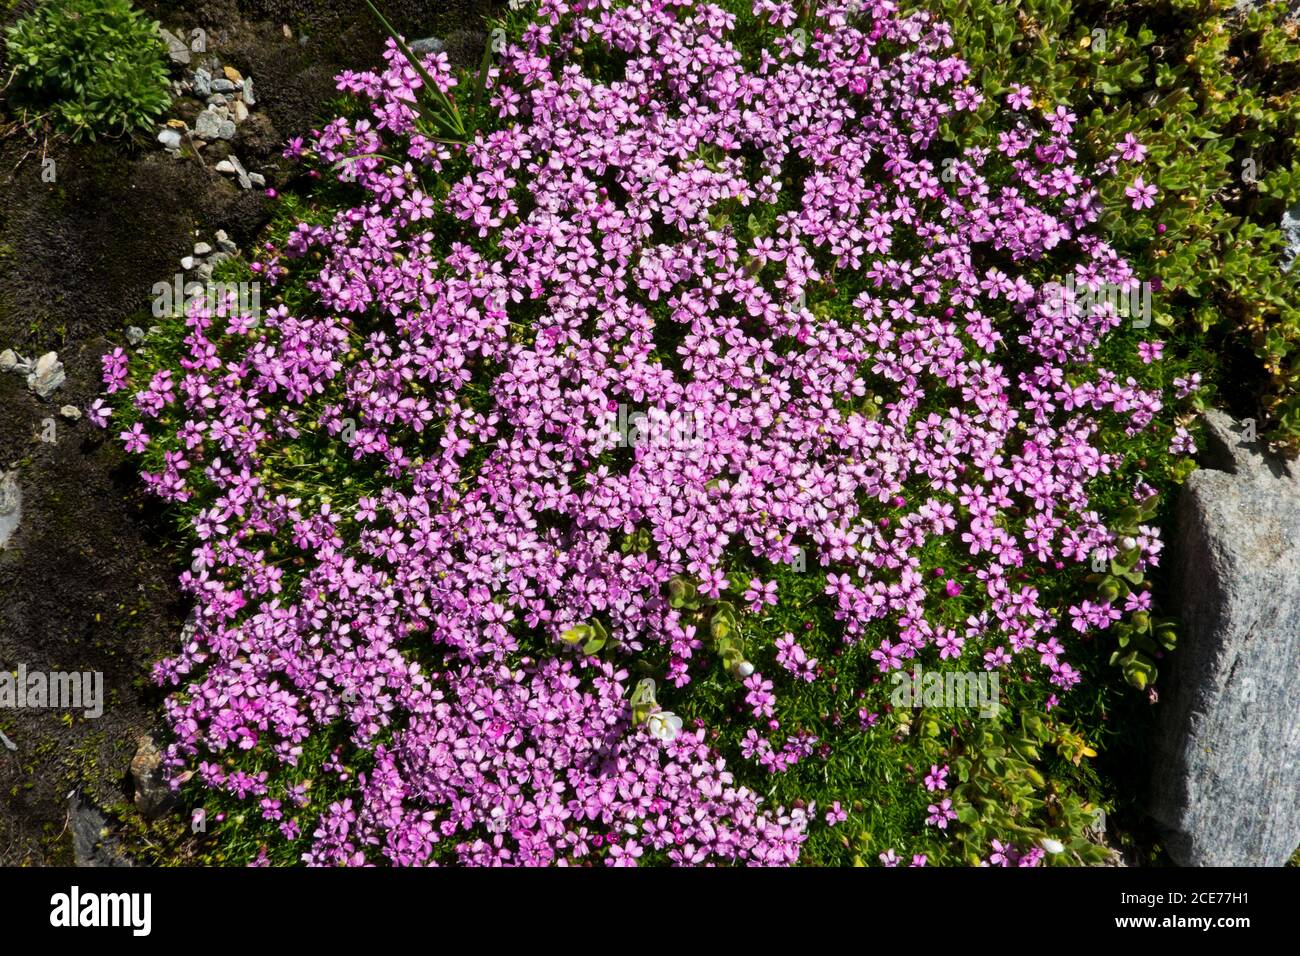 Dense cushion of Rock jasmine, with lots of small pink flowers Stock Photo